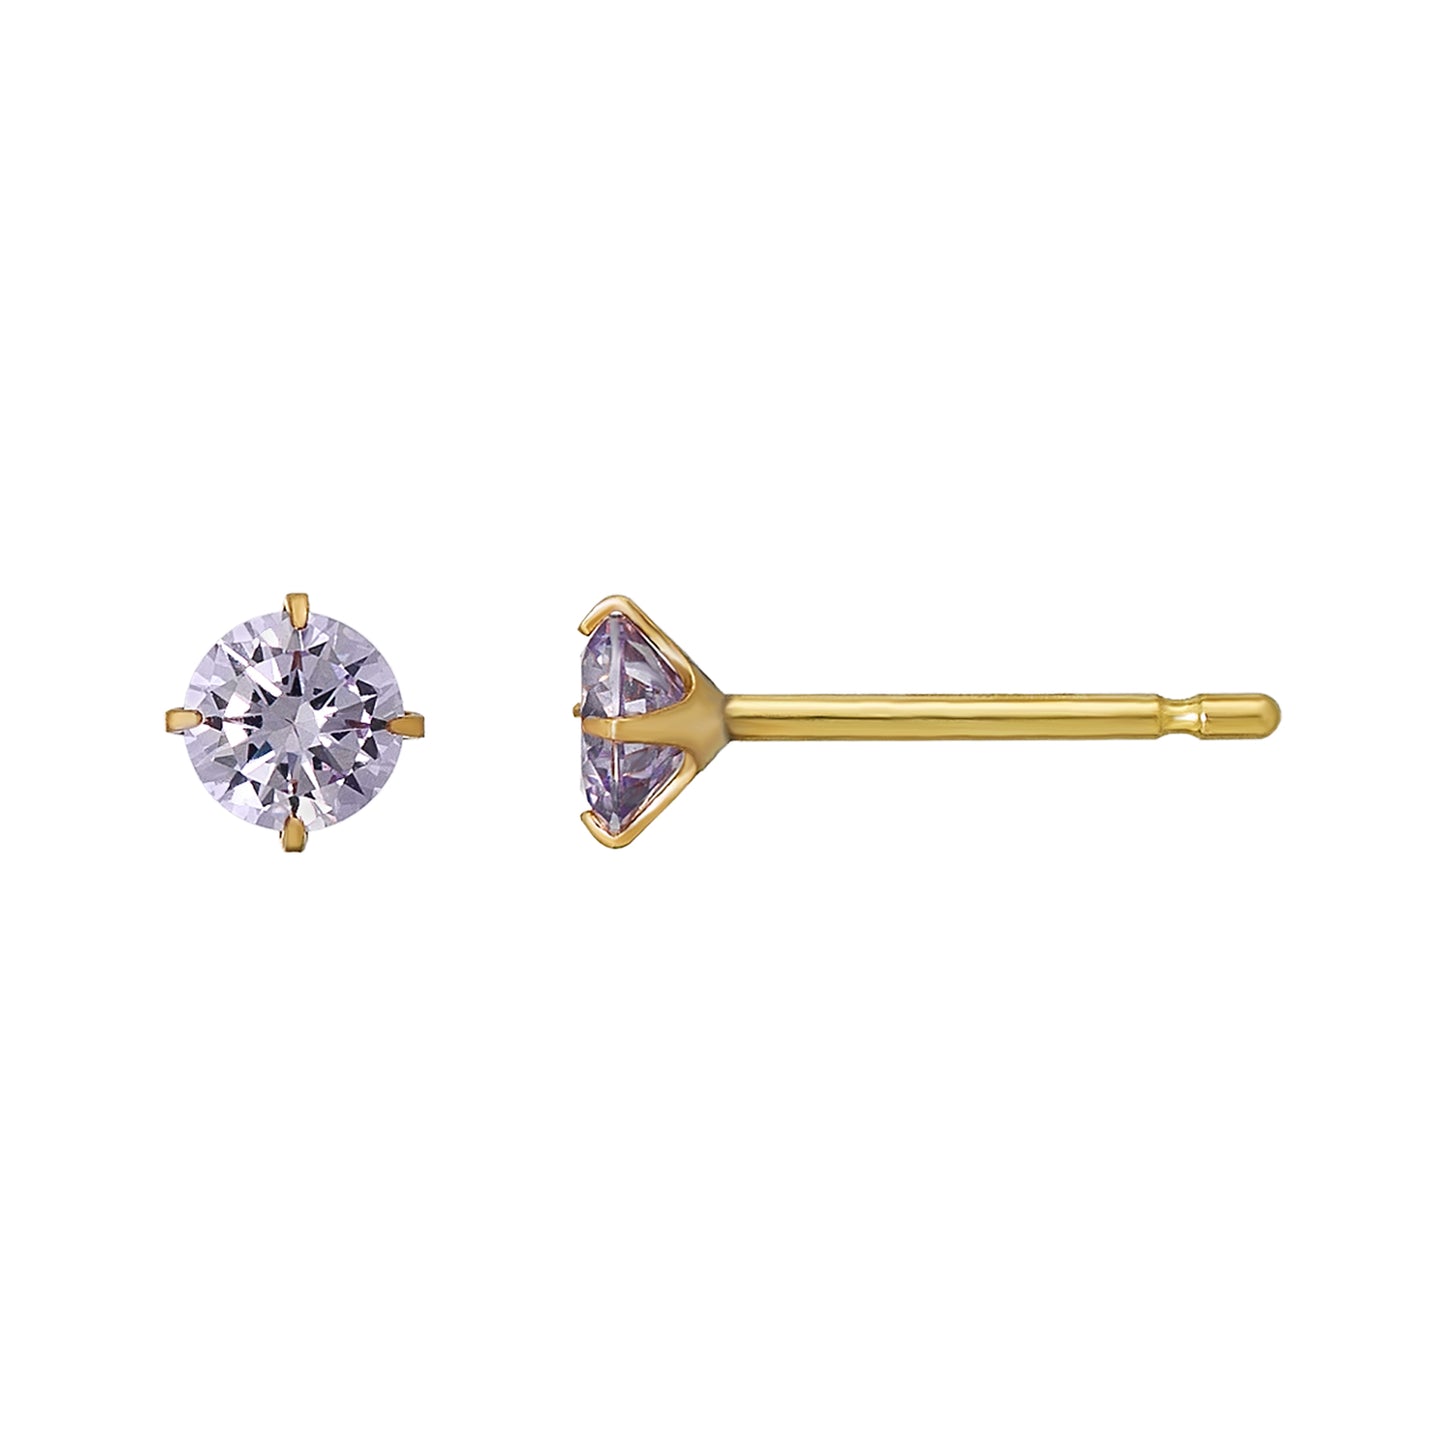 [Second Earrings] 18K Yellow Gold Lavender Cubic Zirconia Earrings - Product Image